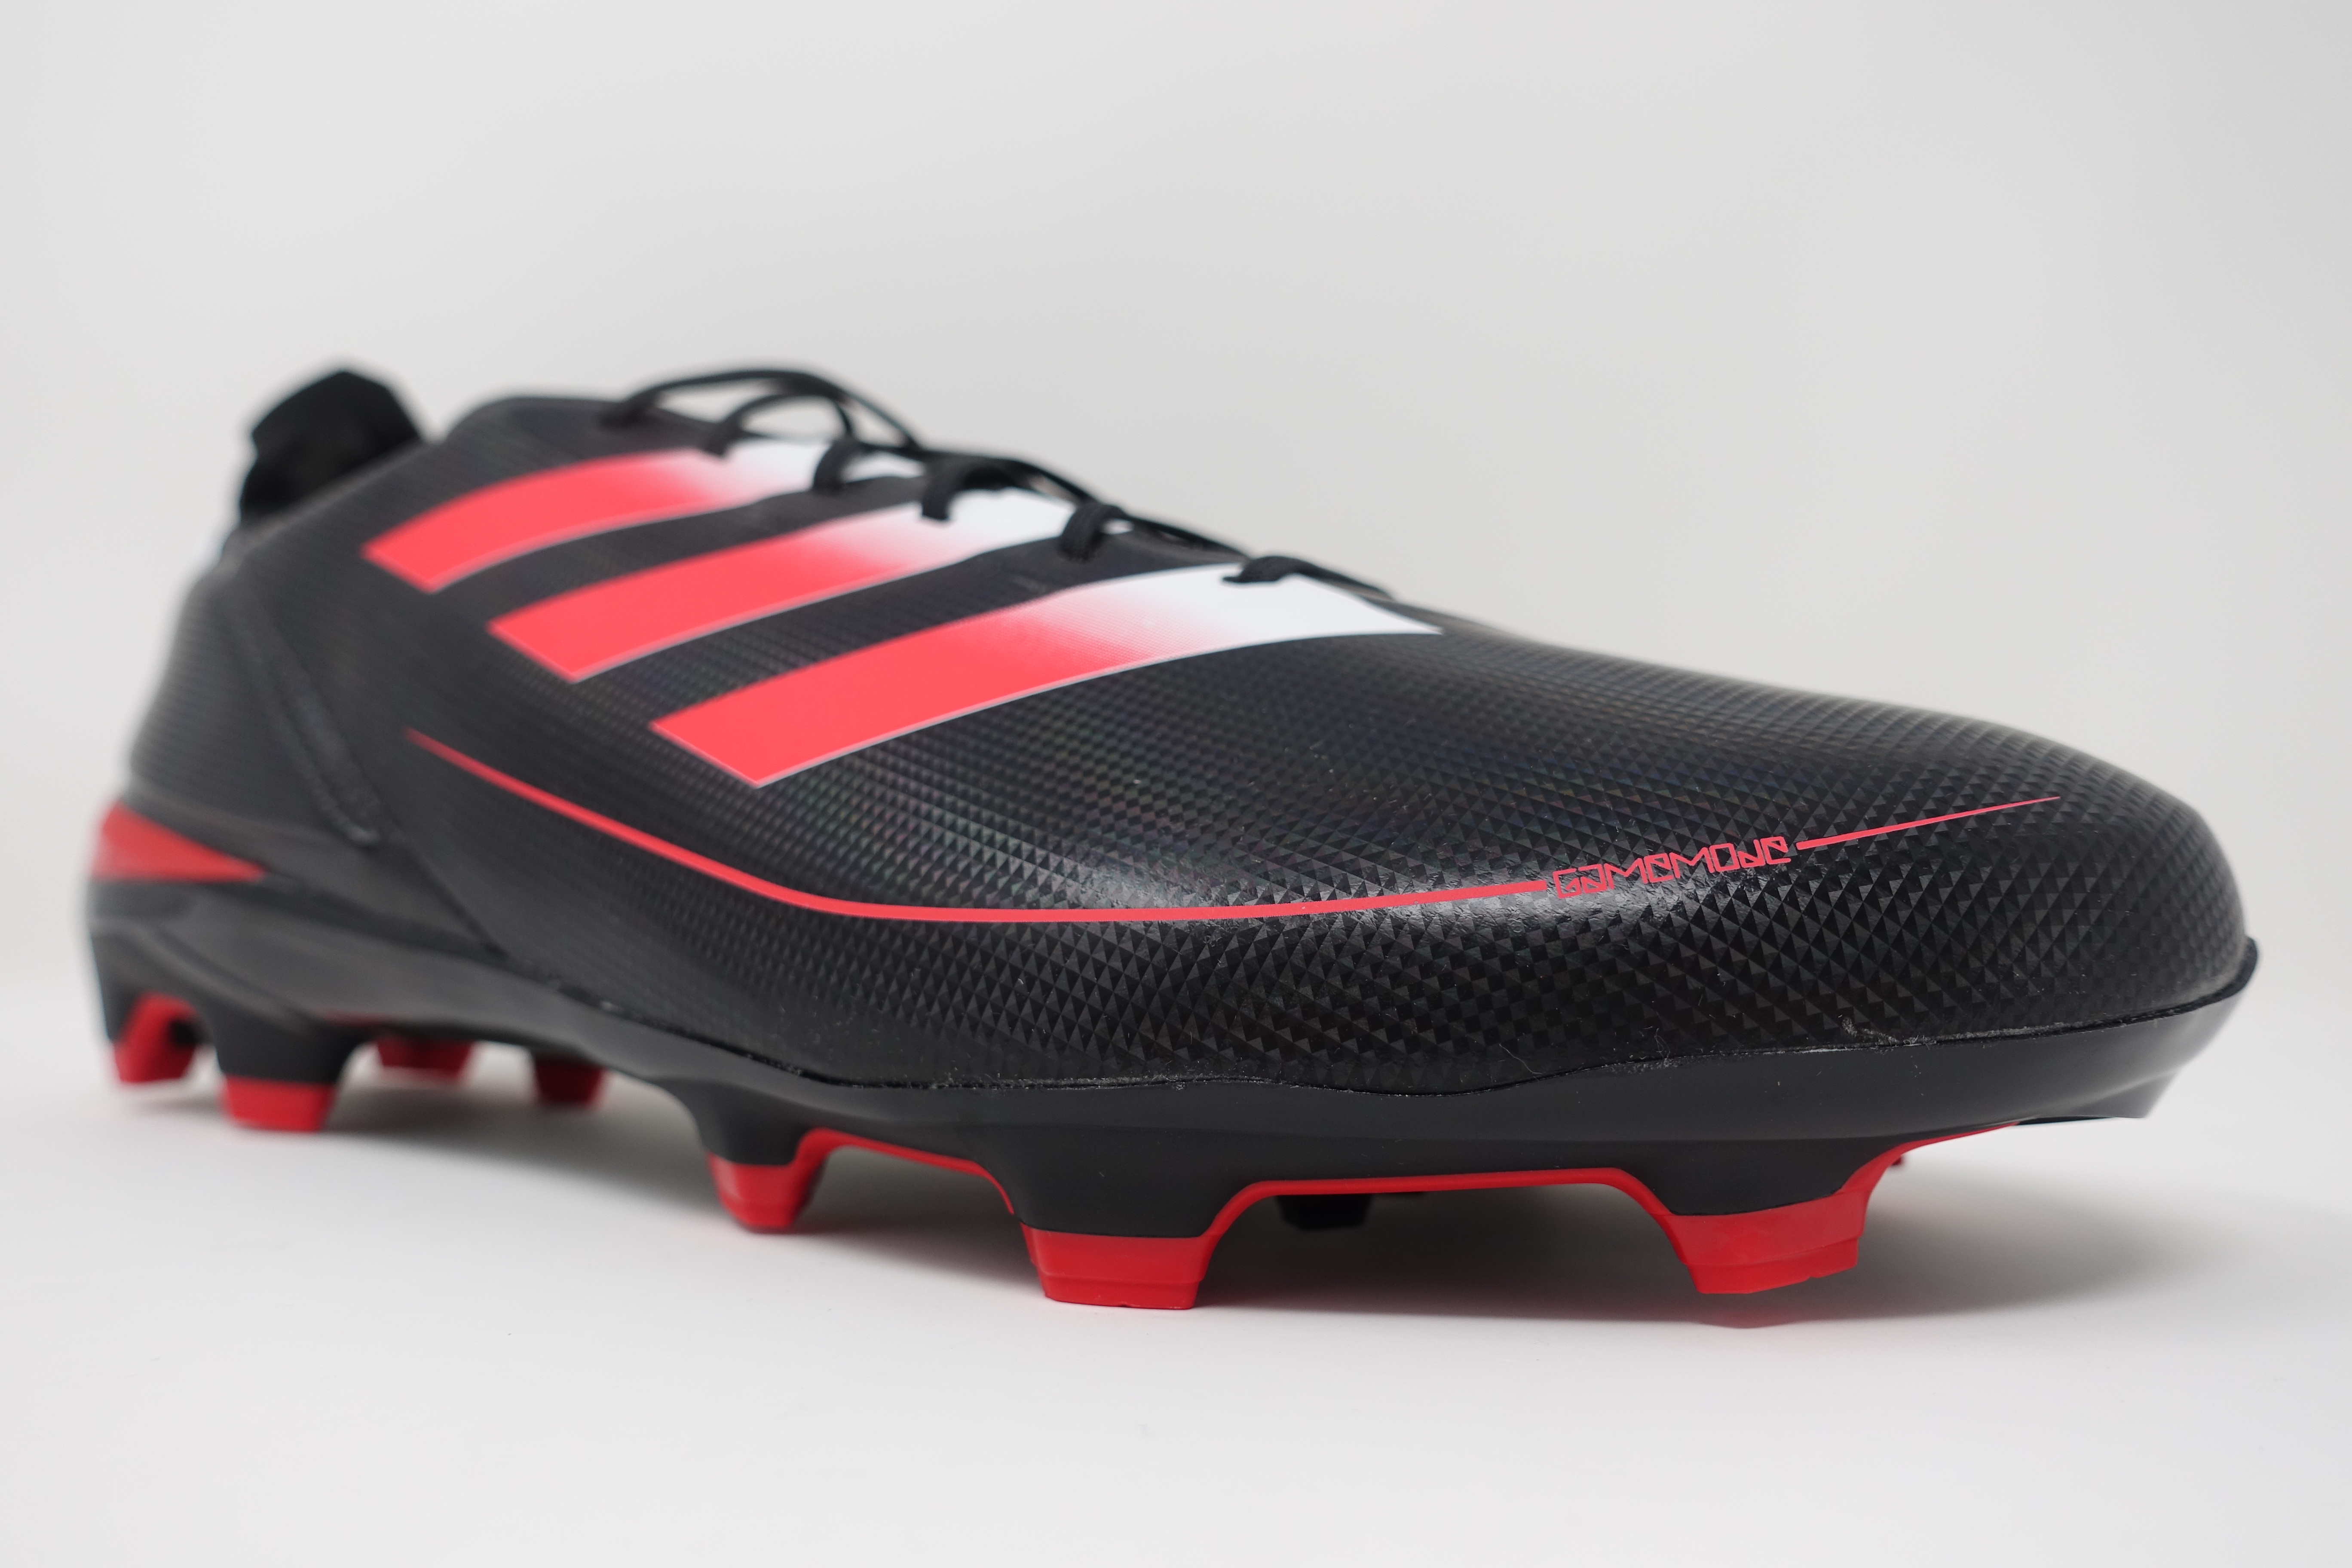 adidas-Gamemode-Synthetic-Color-Mode-Pack-Soccer-Football-Boots-11